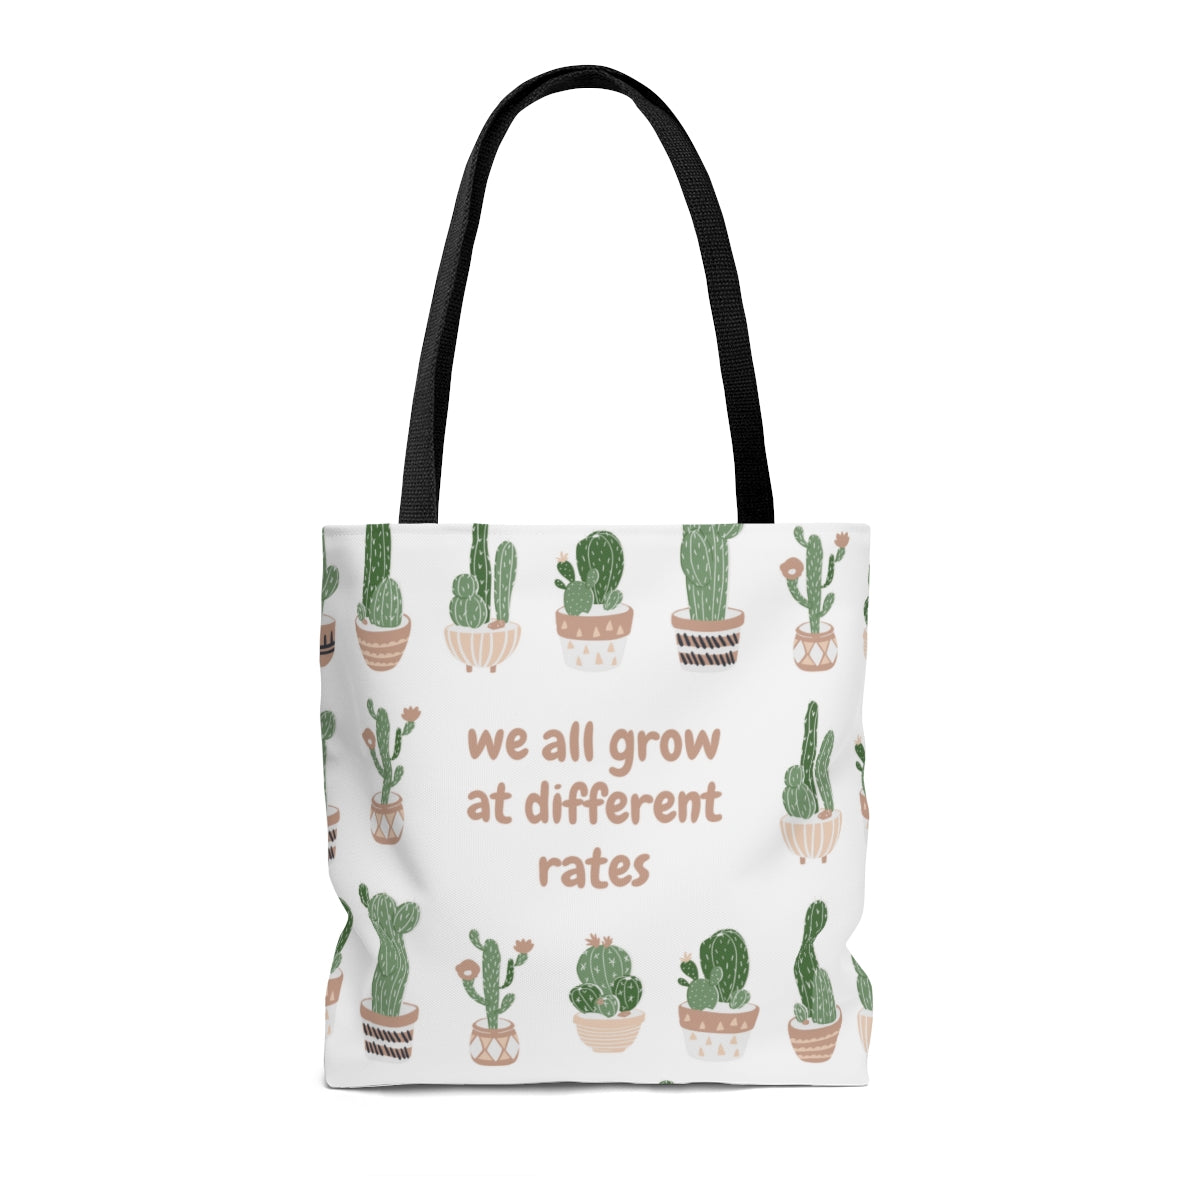 We all Grow at Different Rates Tote Bag | Teacher Tote Bag | Therapist Tote Bag | Behavior analysis tote bag | Behavior Analyst